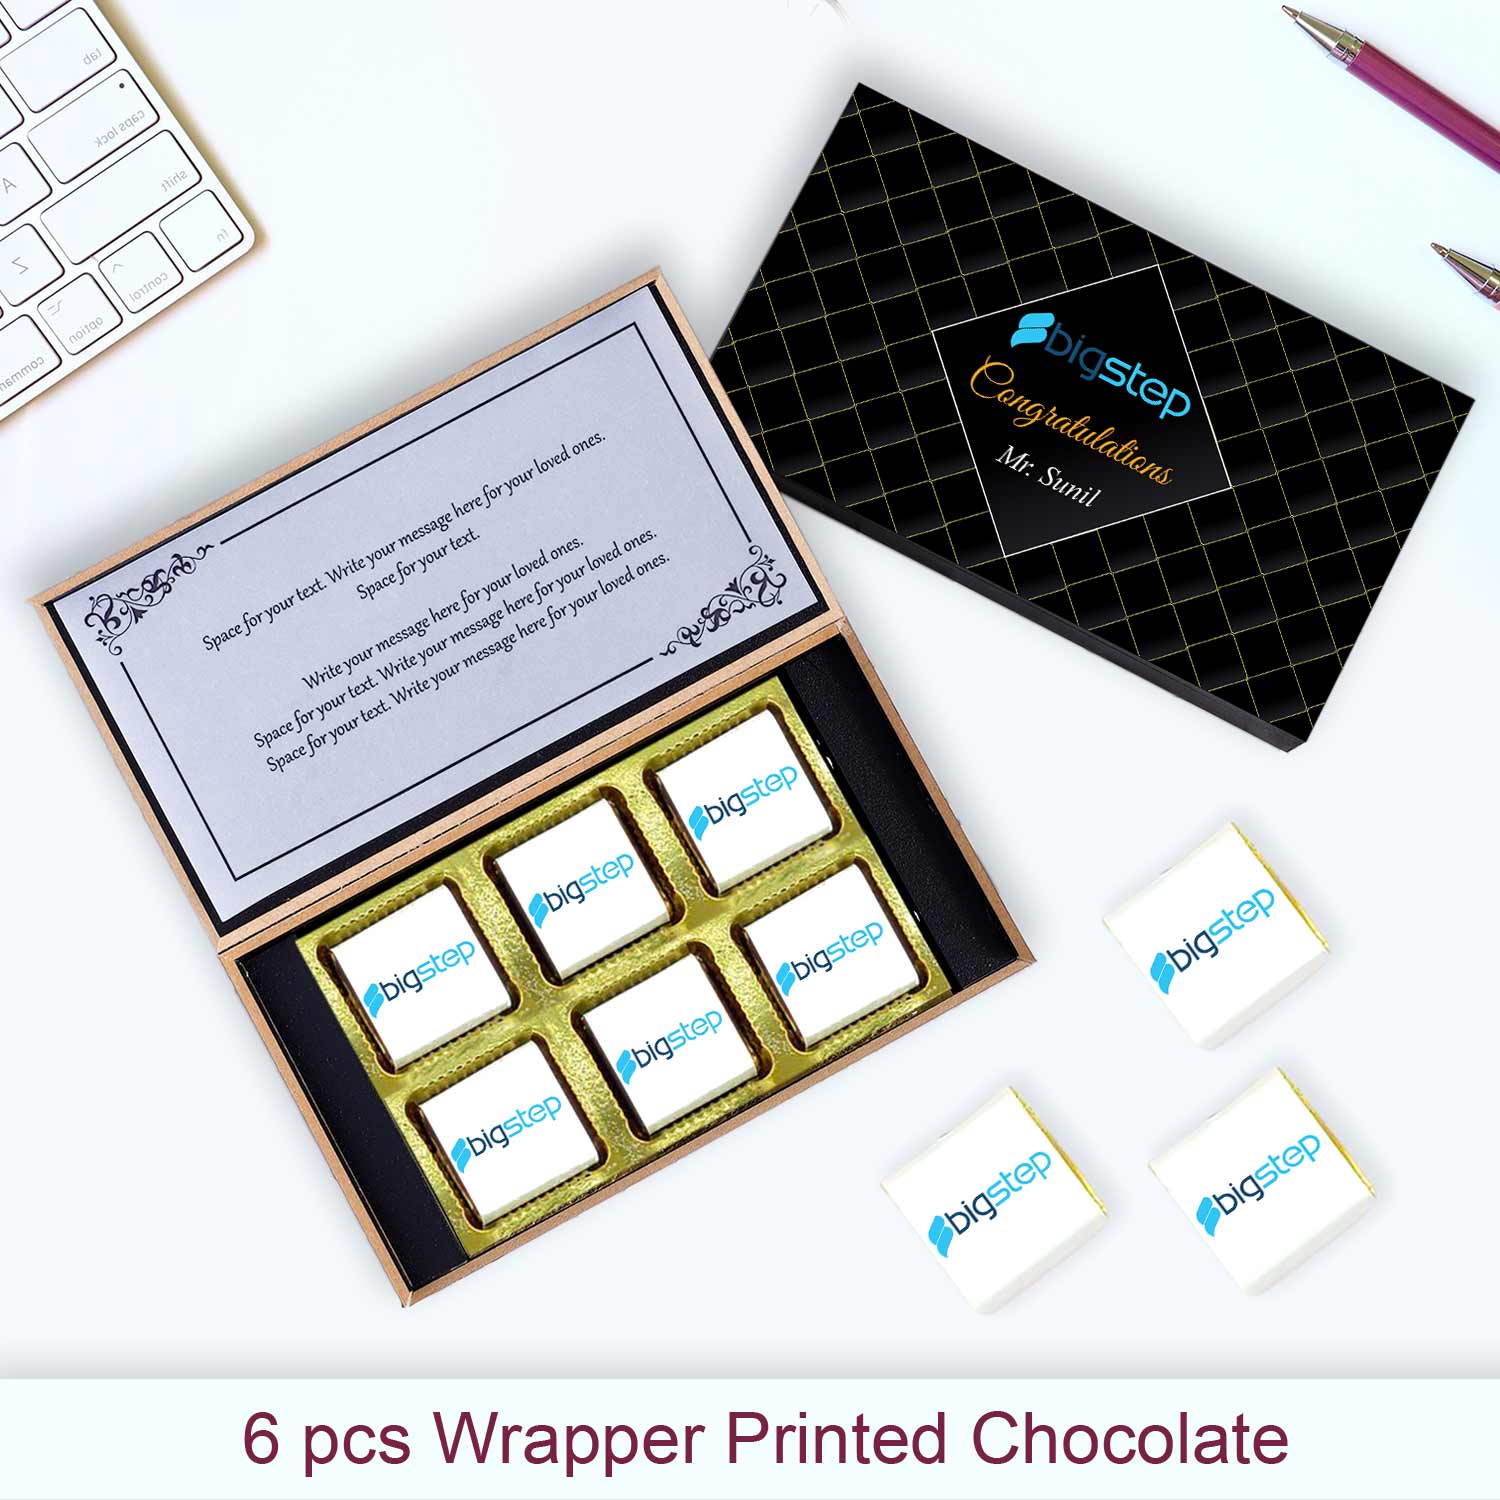 Wrapper Printed Chocolates